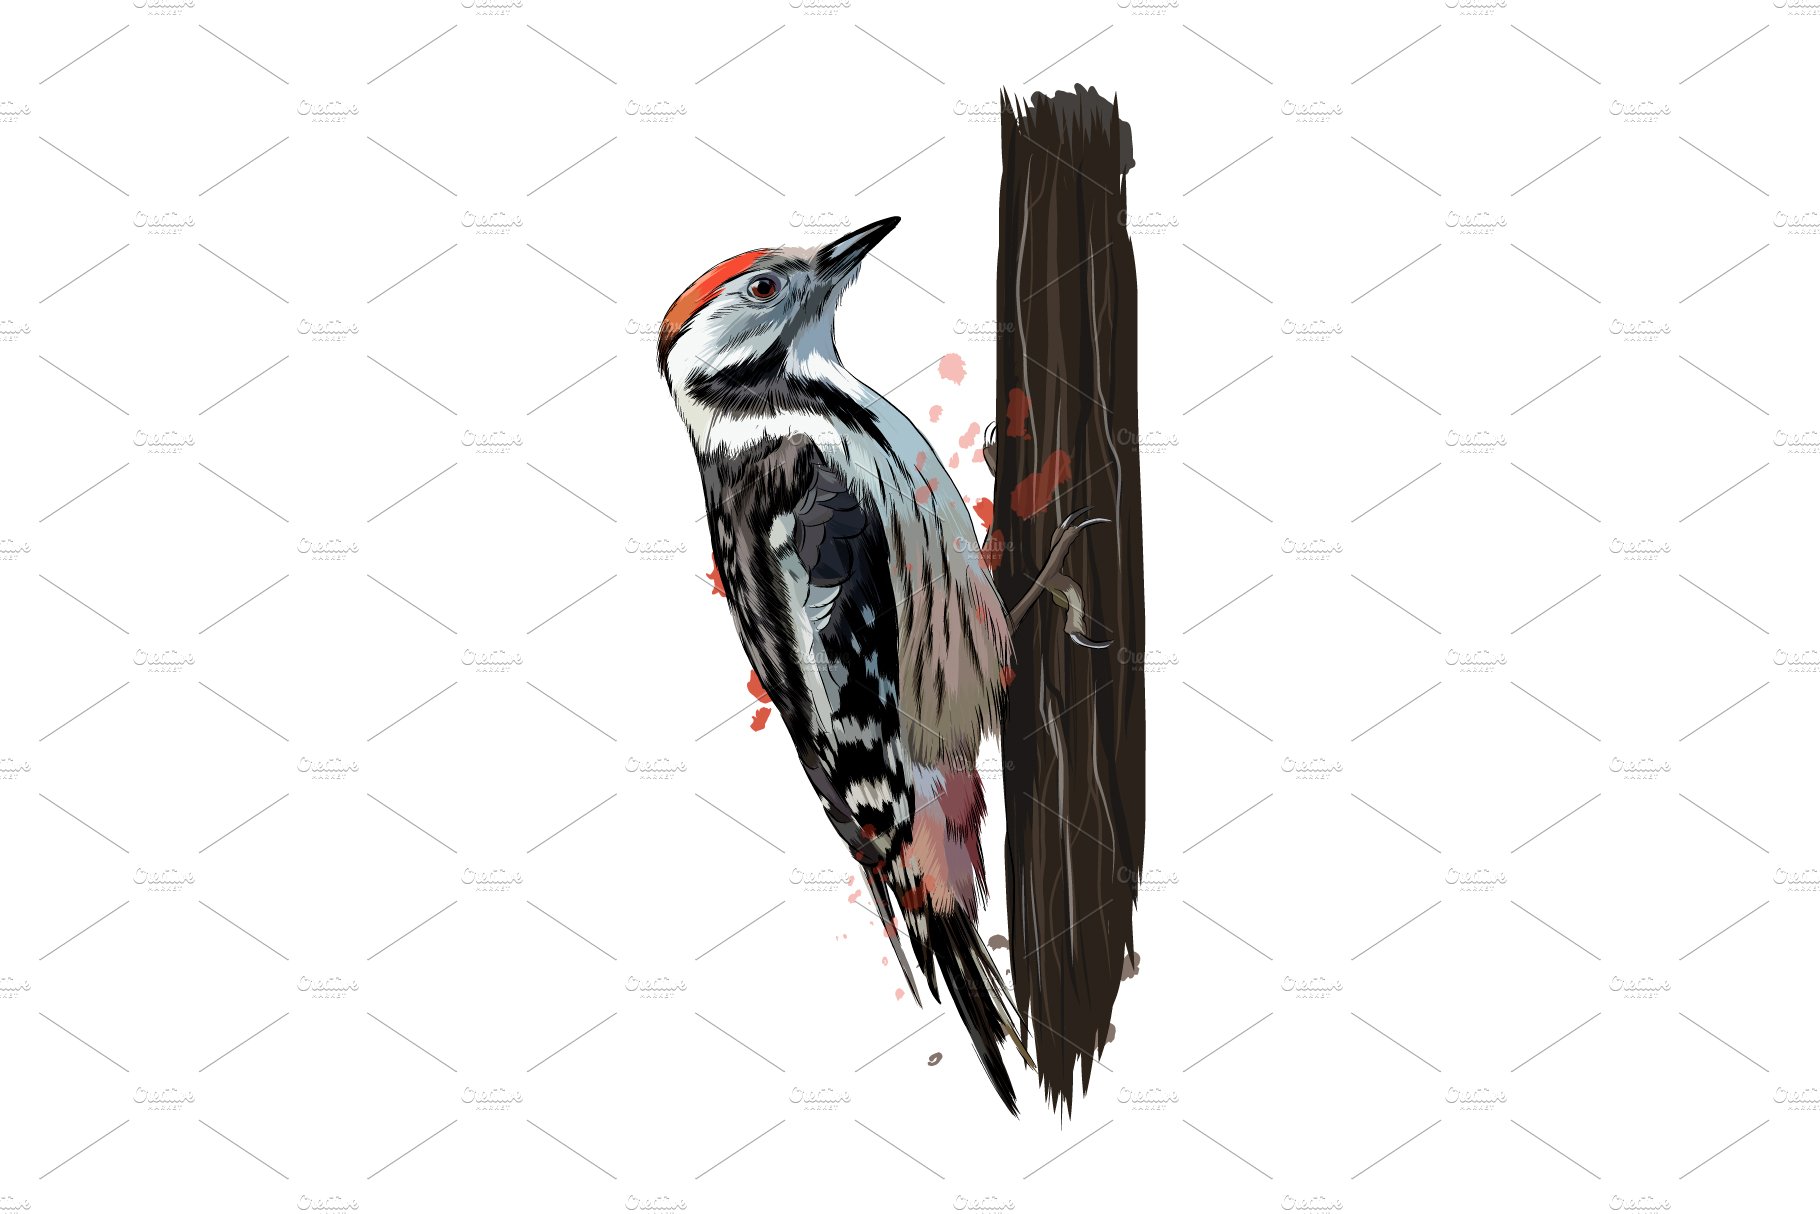 Woodpecker from a splash cover image.